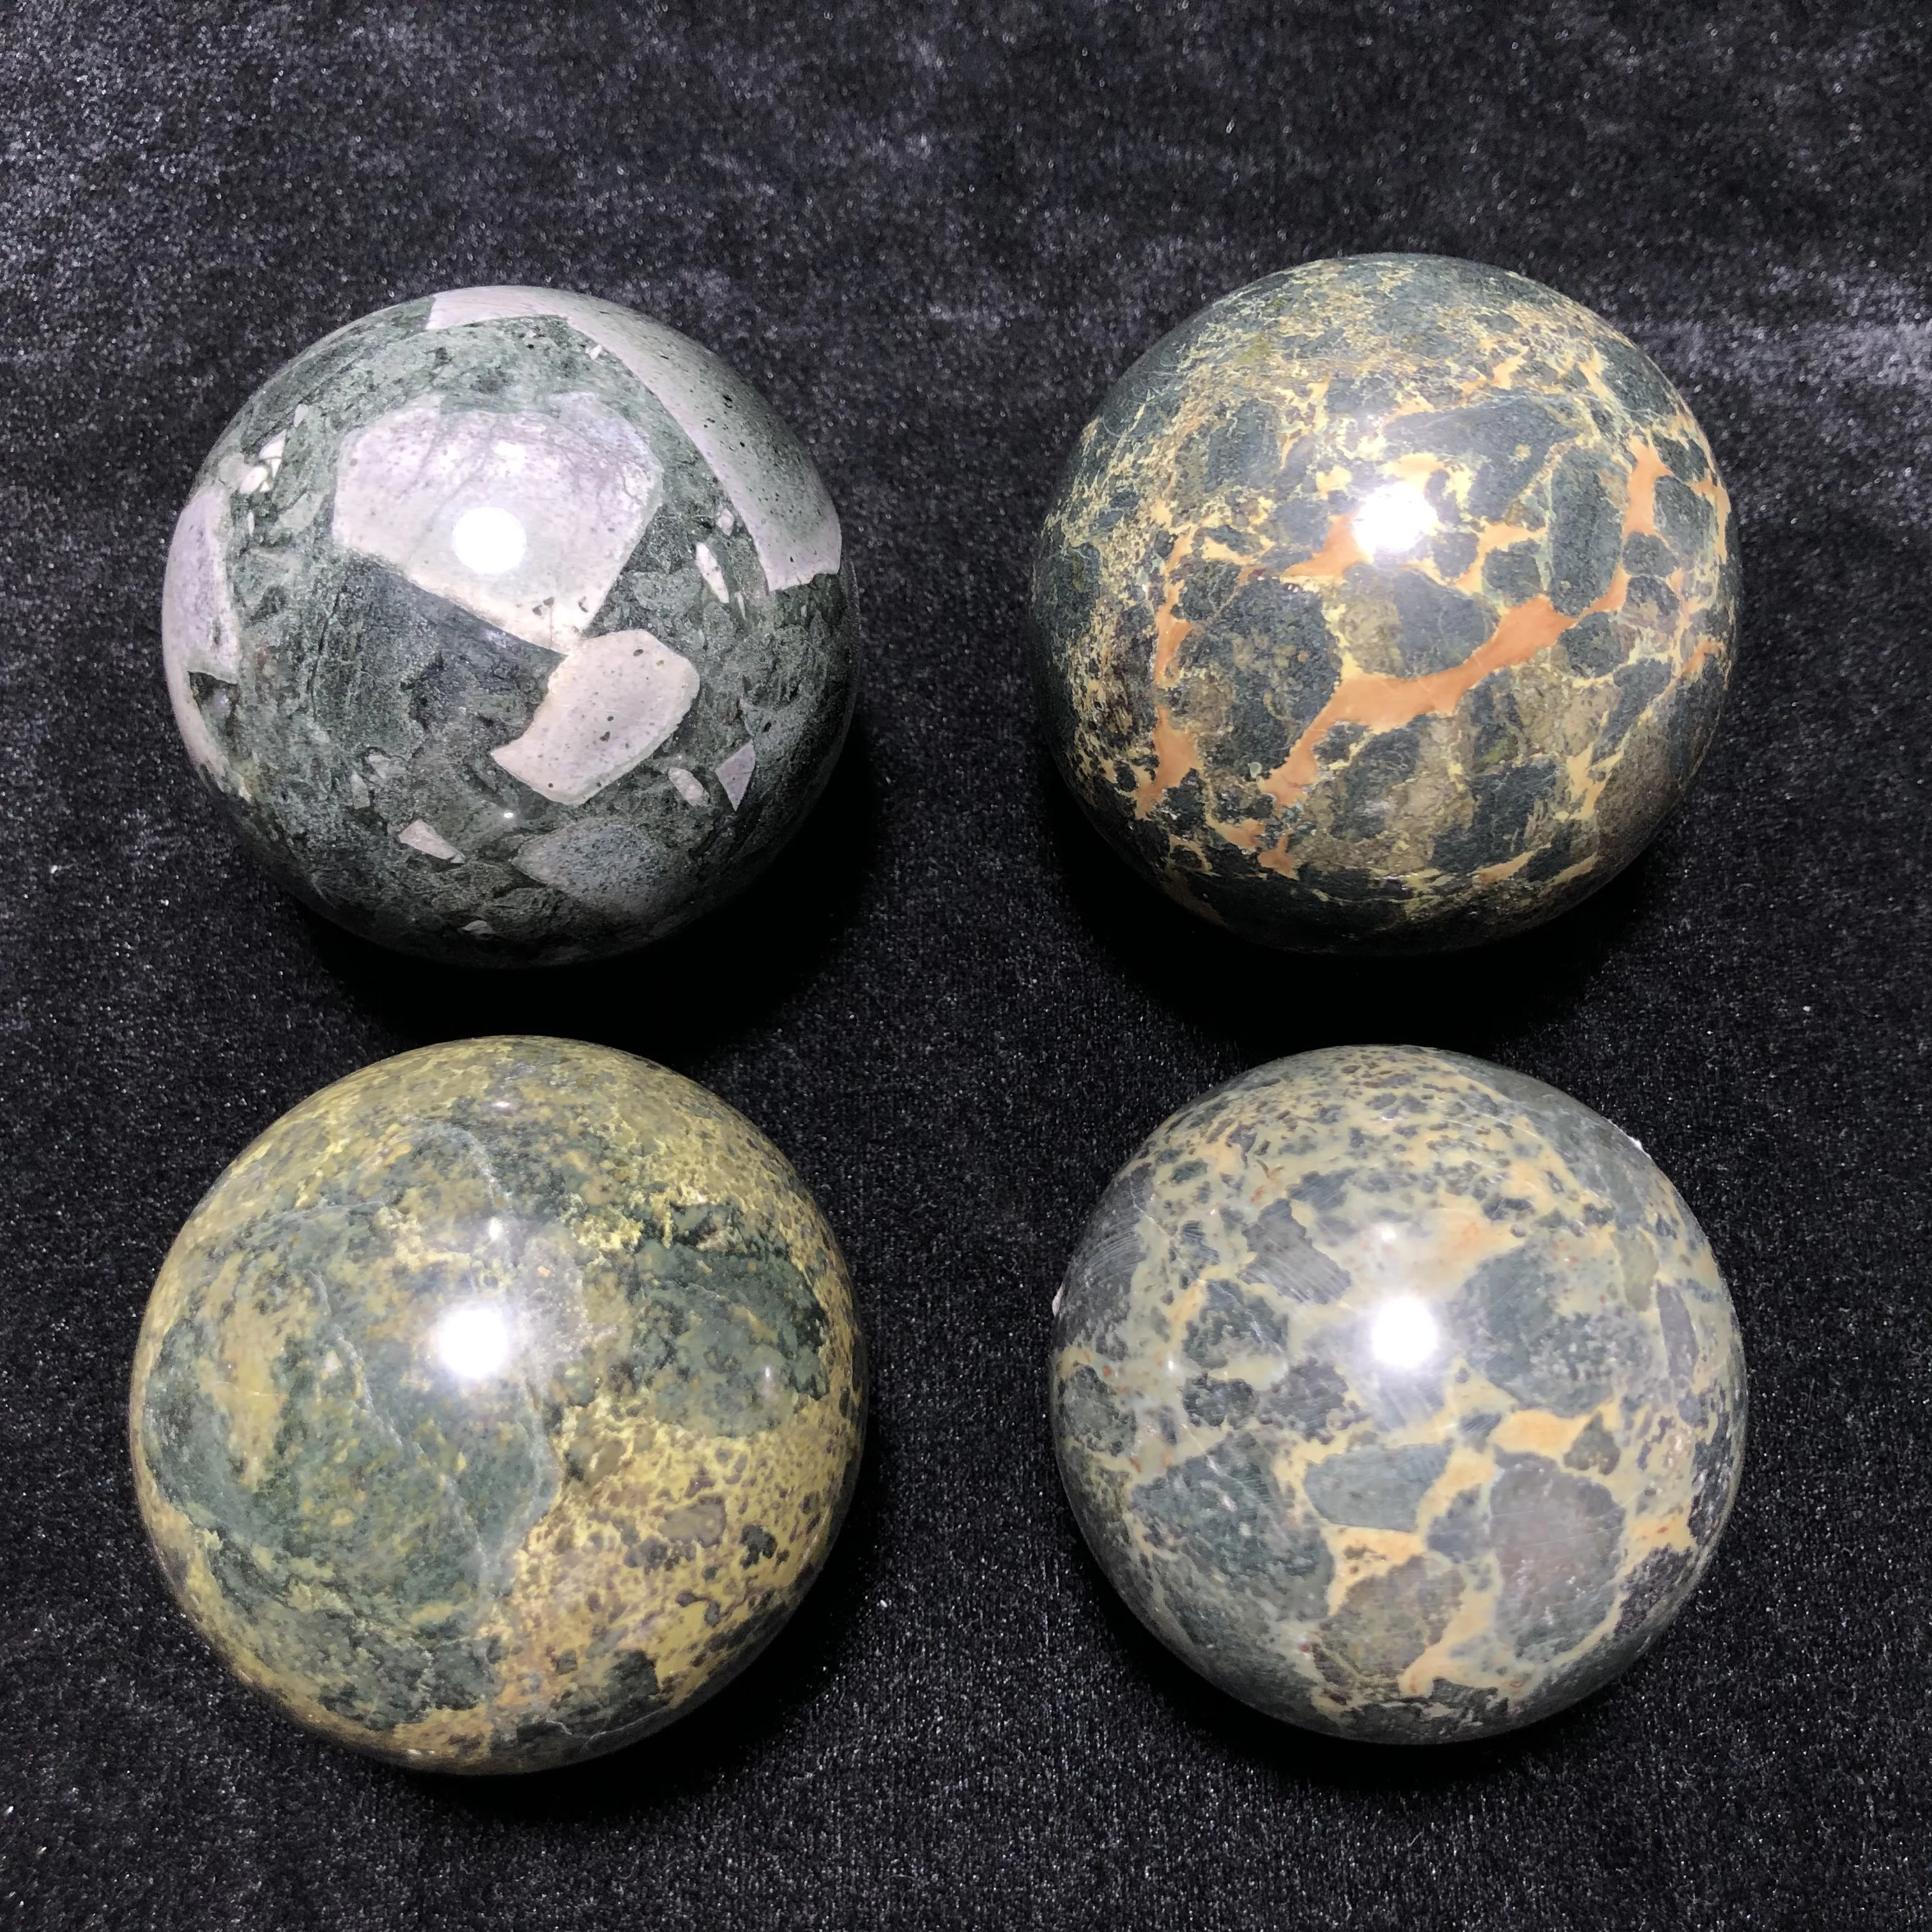 Natural Dragon Vein Hand-Polished Sphere Feng Shui Healing Crystals Quartz Mineral Ball Home Decoration Handicraft Stone Spheres